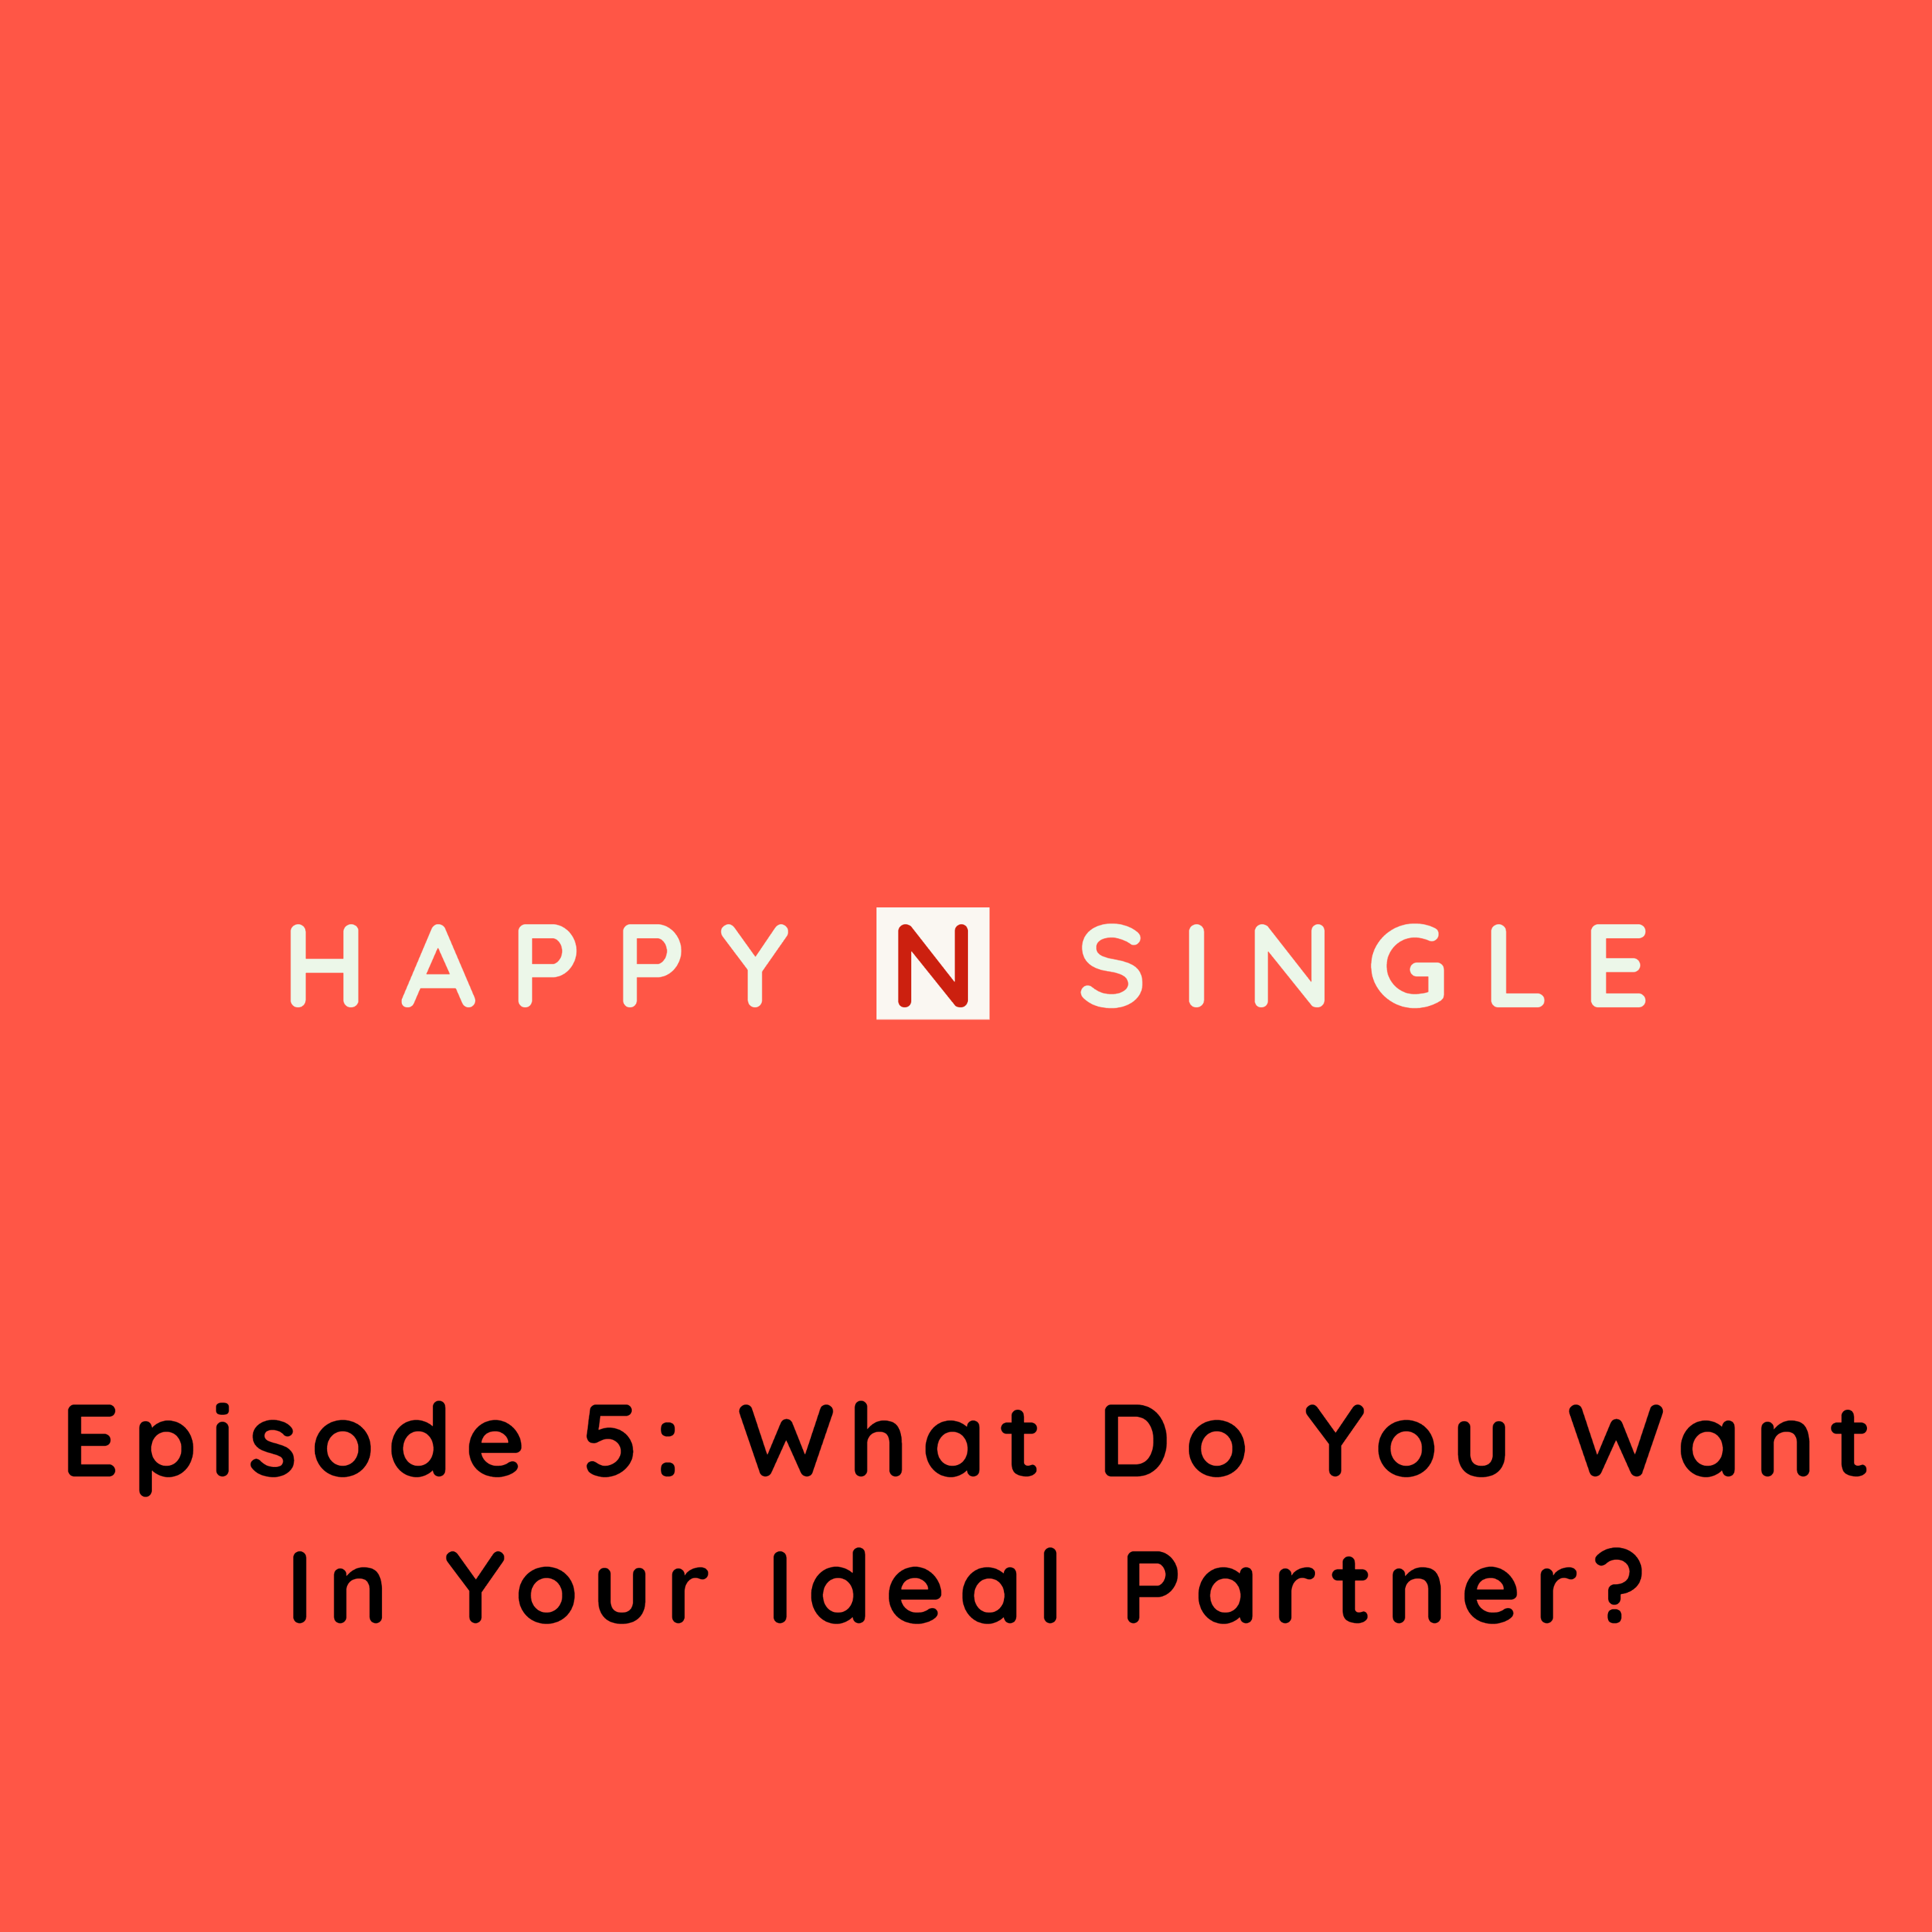 What Do You Want in Your Ideal Partner?